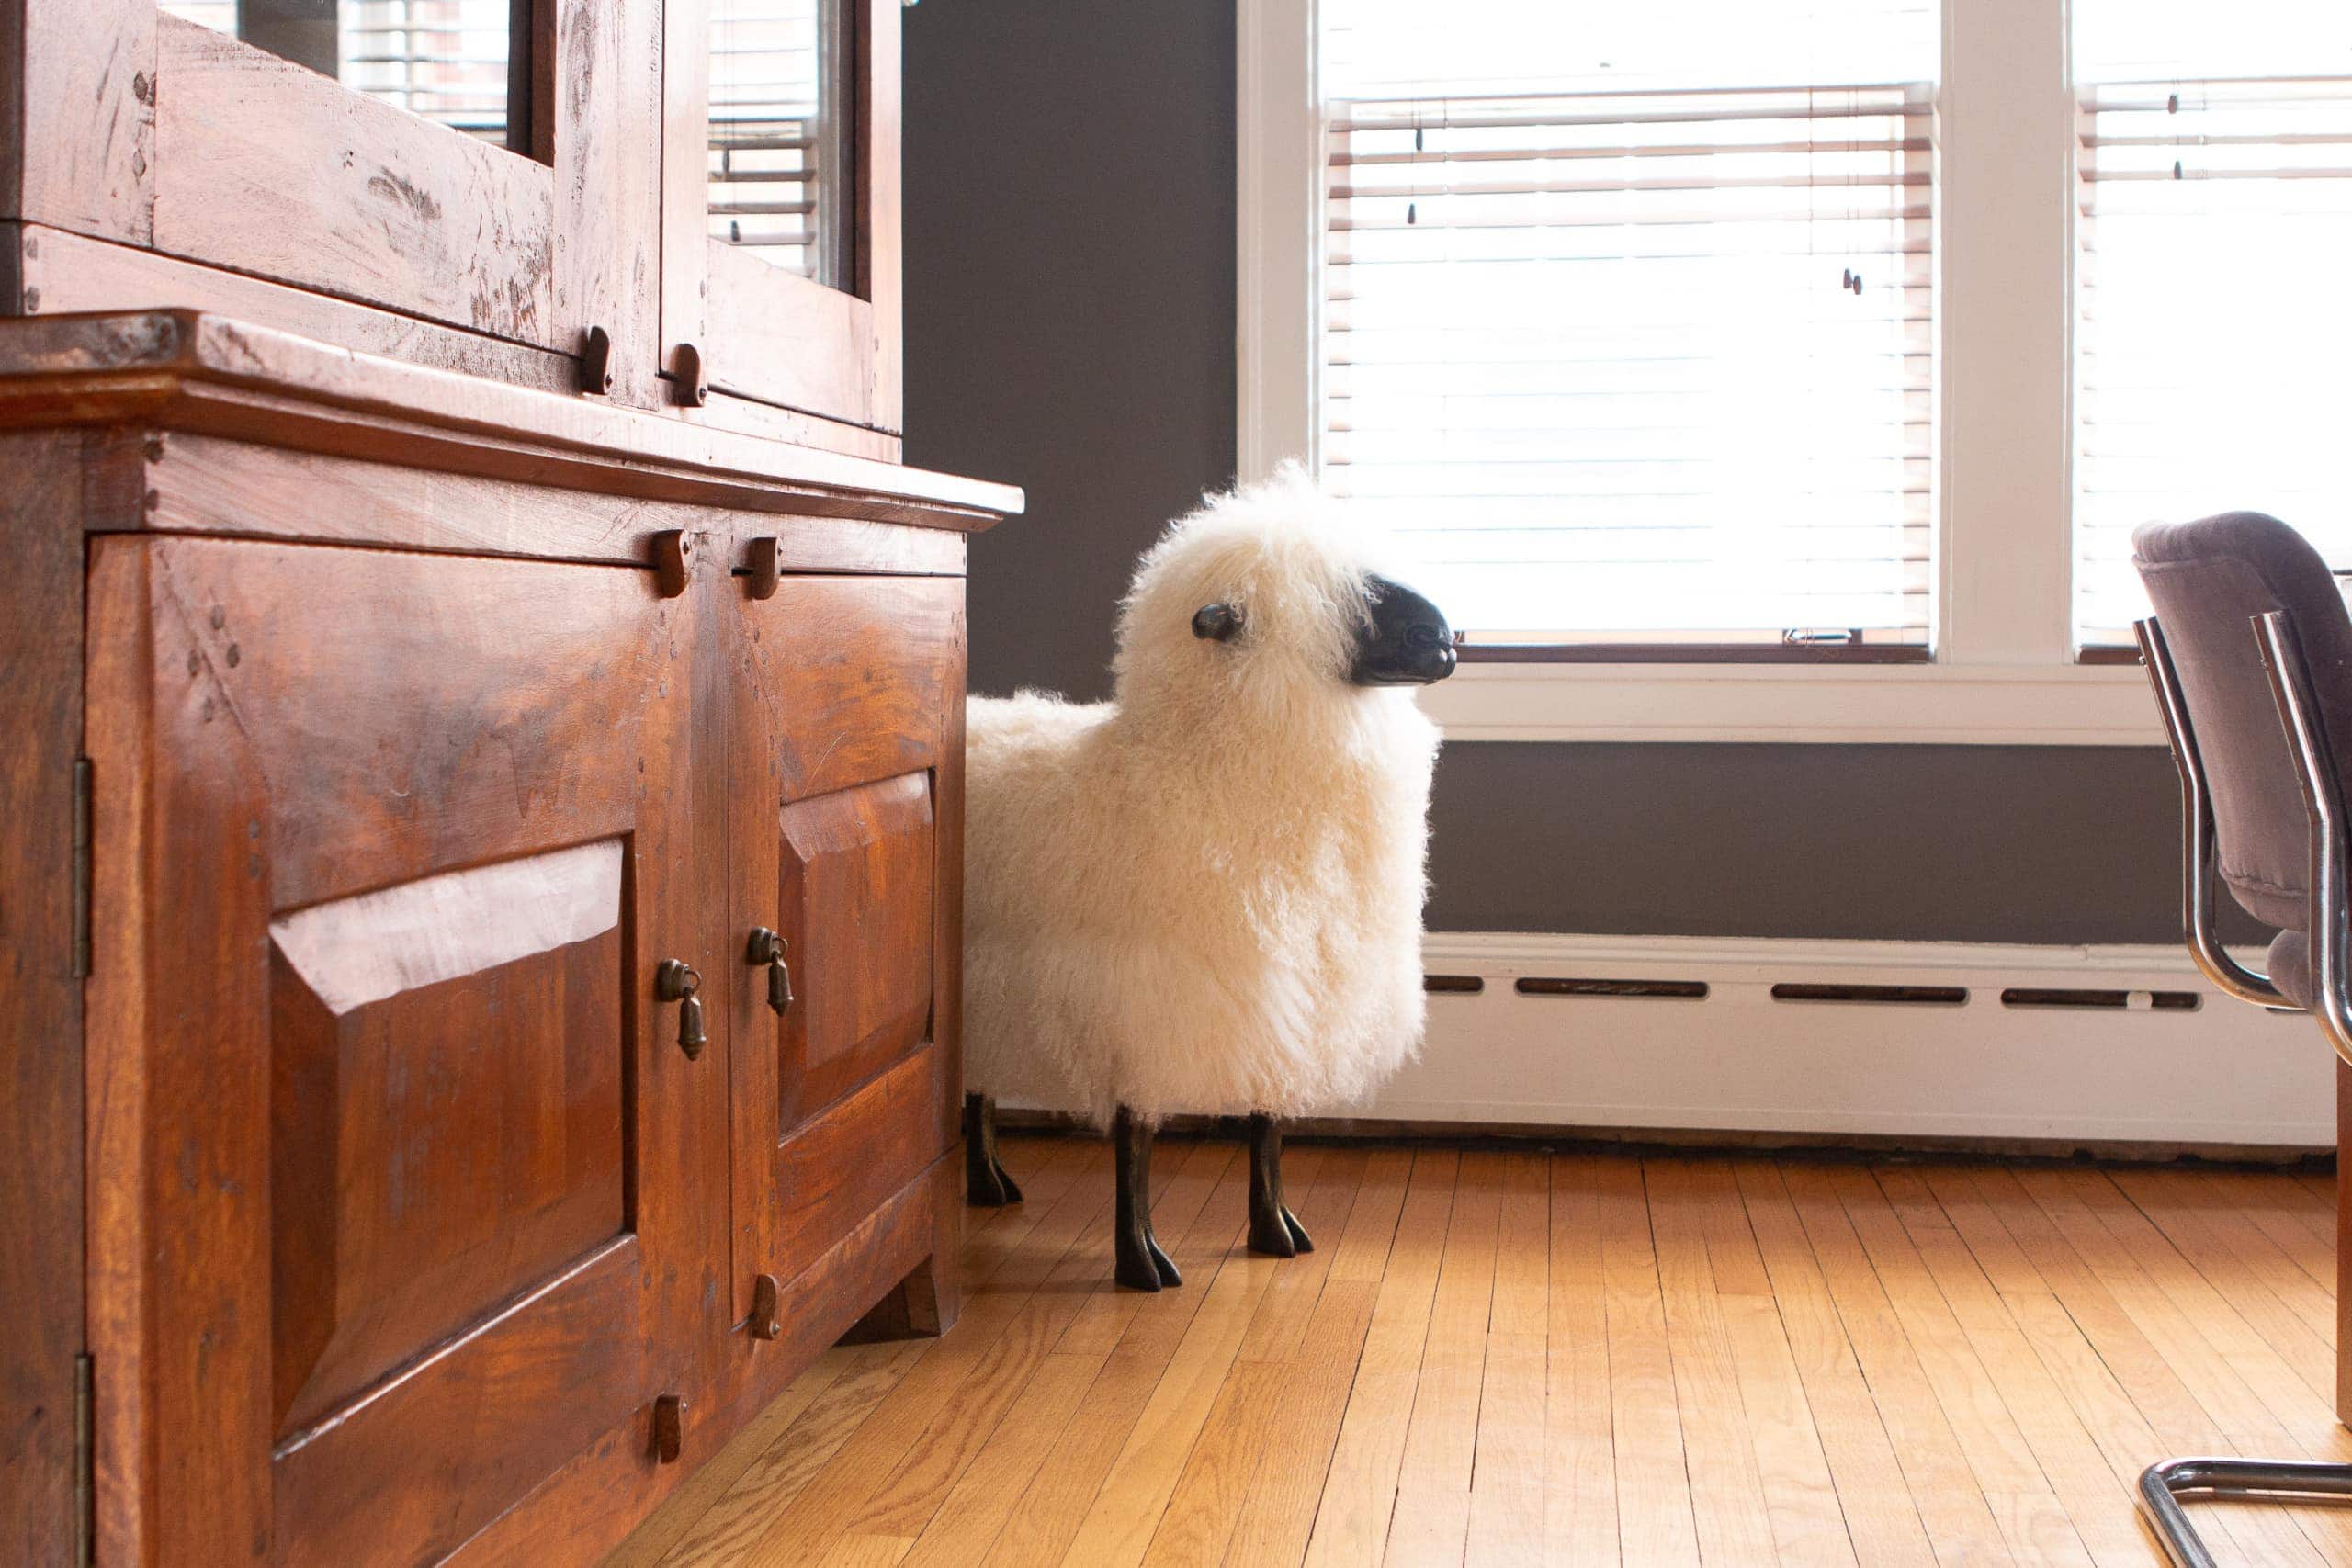 Adding a white sheep to a dining room